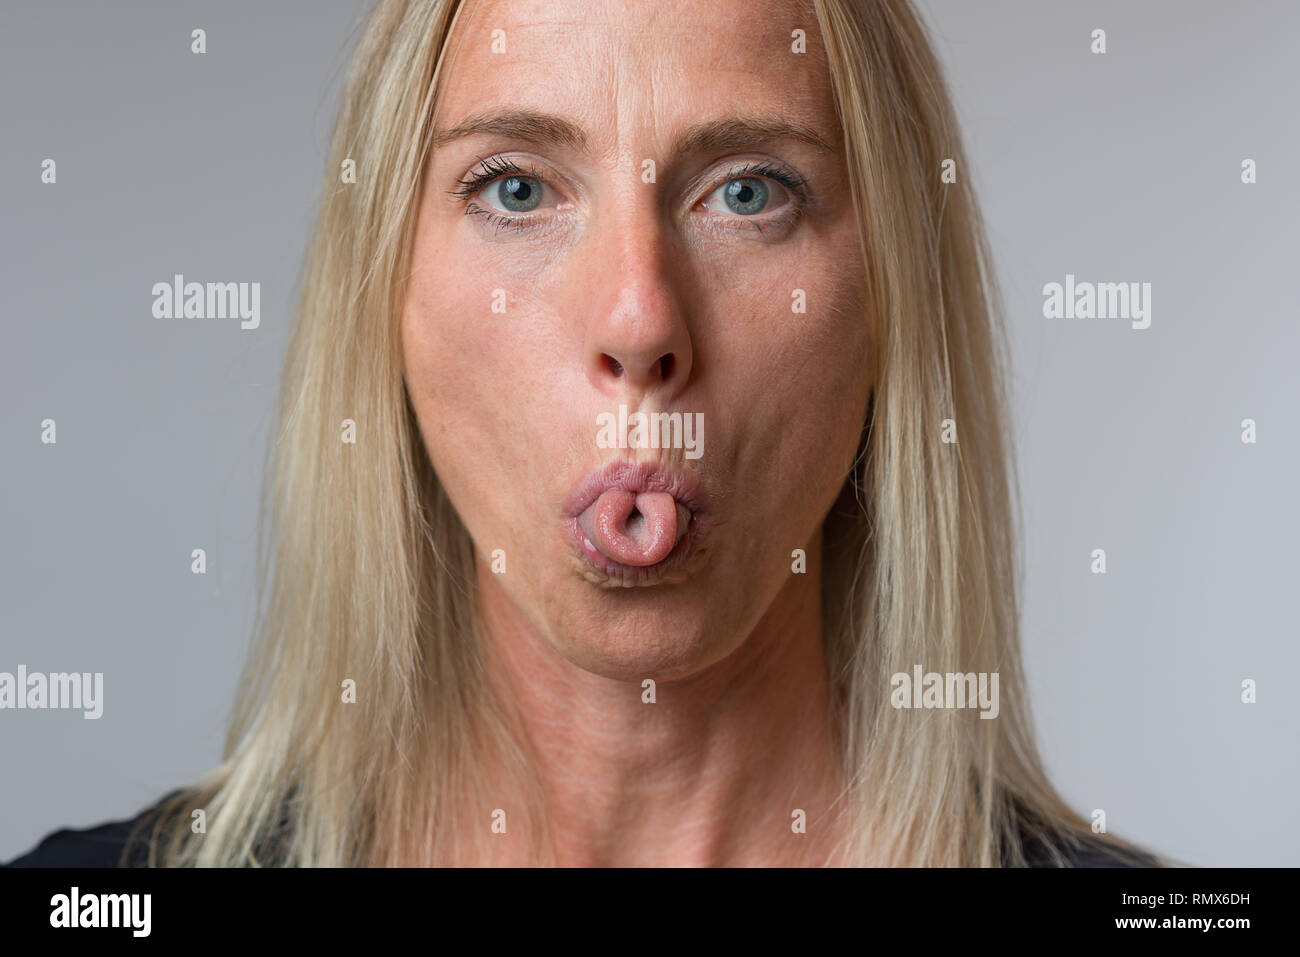 Mature woman sticking out her tongue at camera in a rude contemptuous gesture in a close up cropped face portrait Stock Photo